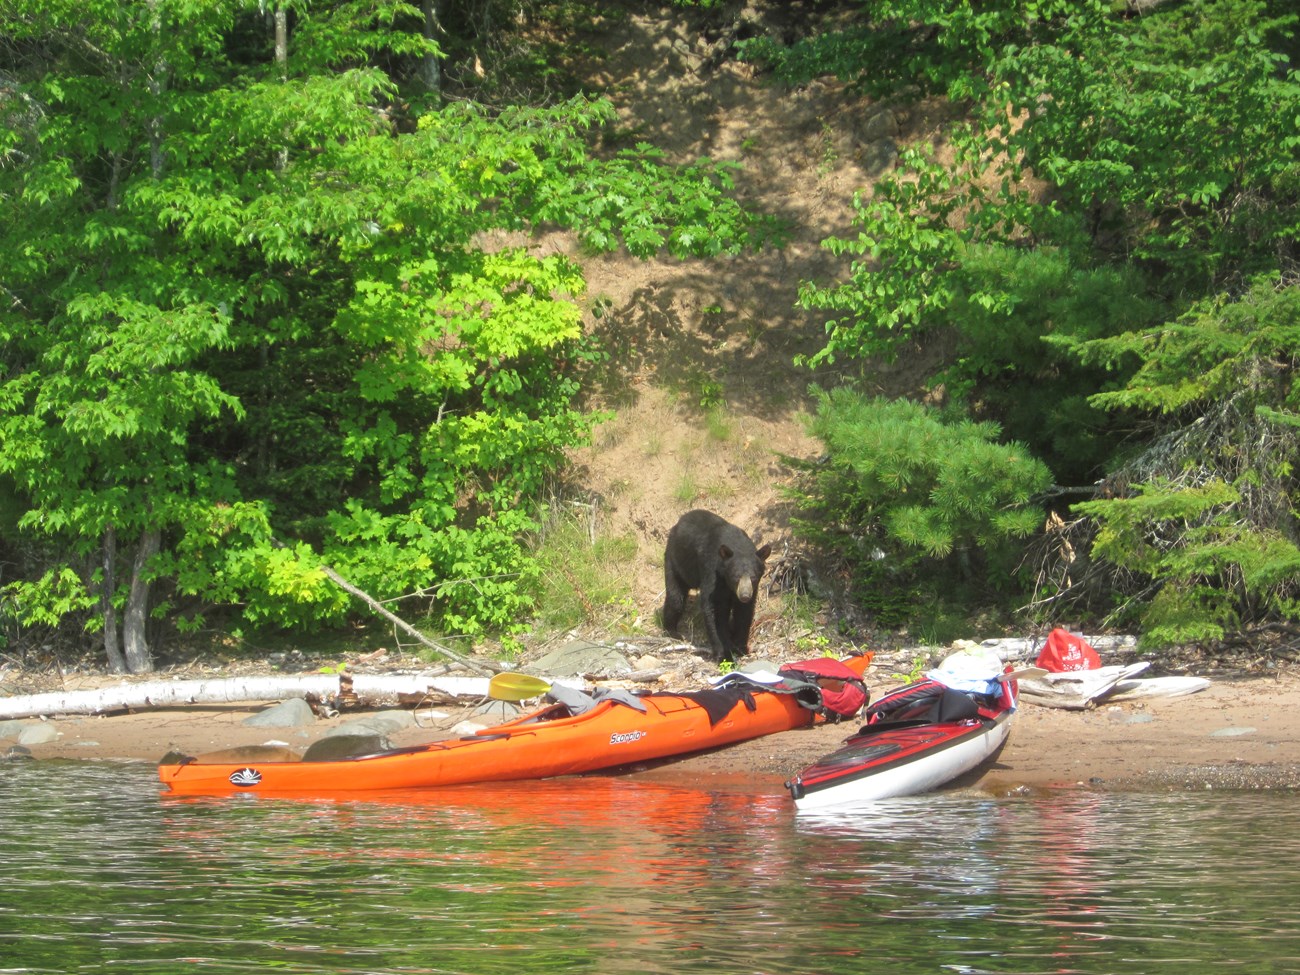 Photograph of a black bear walking on a sandy beach with colorful sea kayaks on the shore.